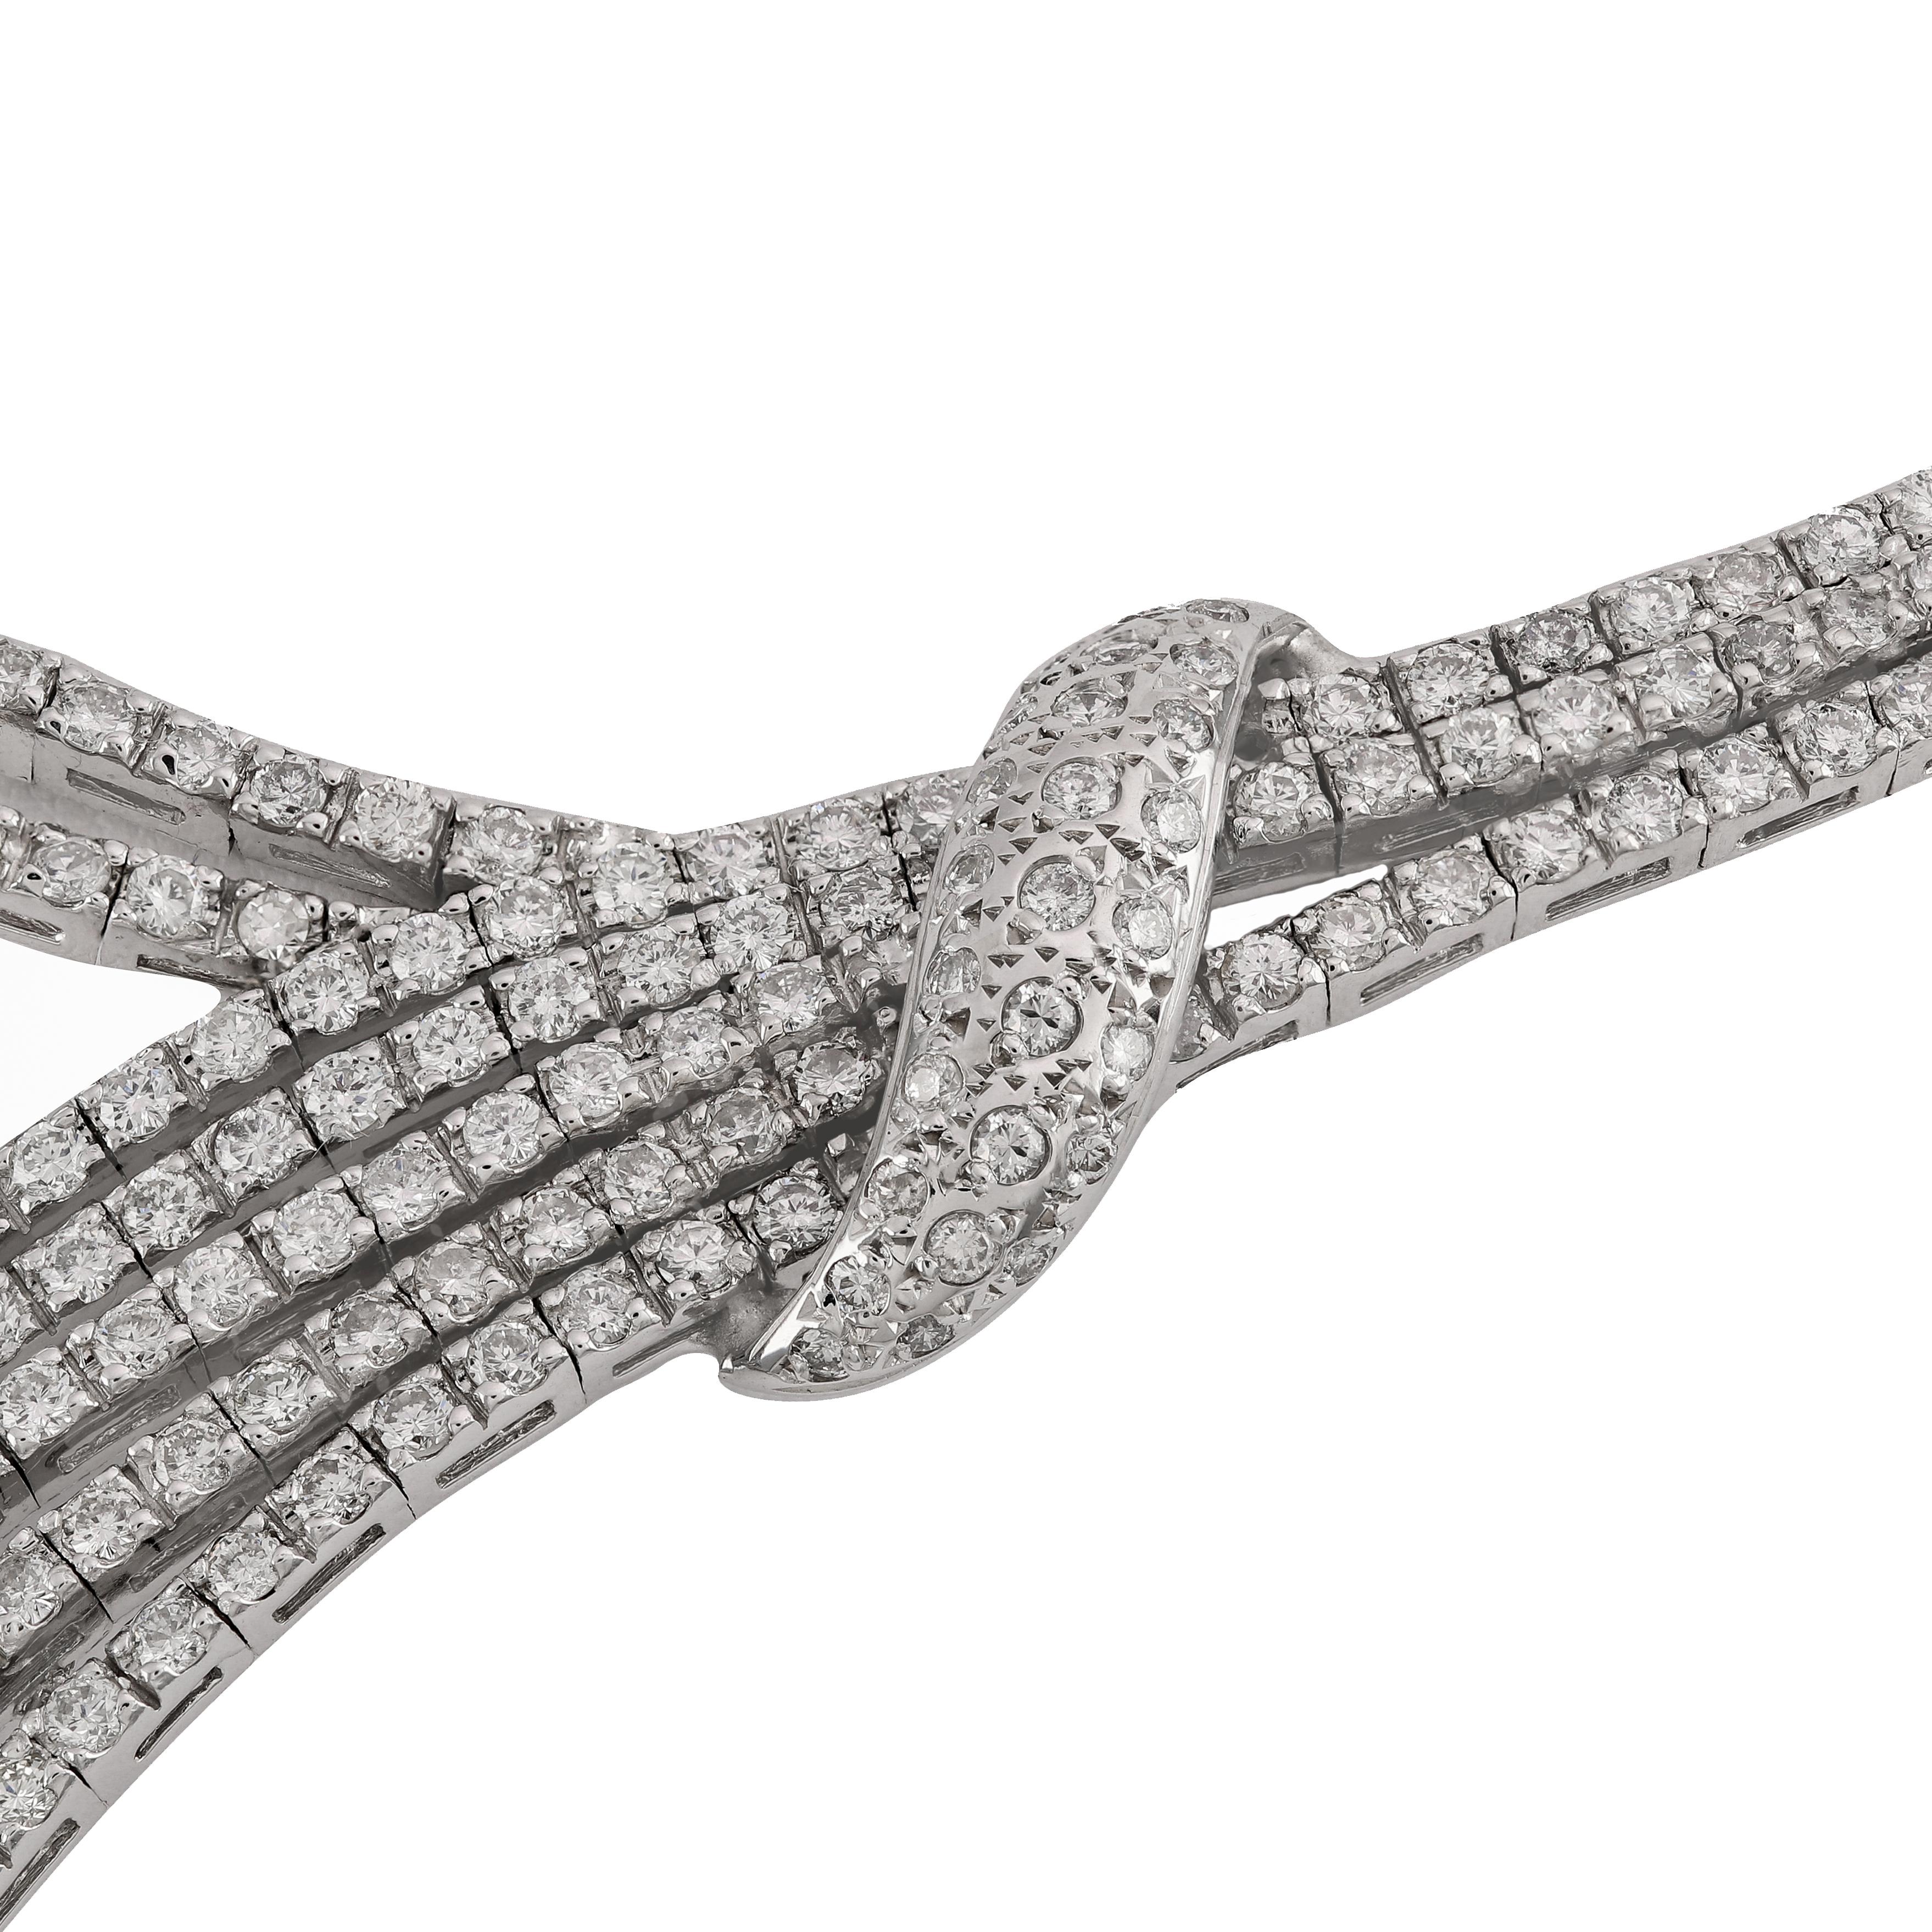 Diamond 10.50 Carat White Gold Waterfall Necklace
A very high-end, Diamond Waterfall Necklace, this elaborate diamond necklace is made with over 50.0 grams of 14k white gold. Handset with a total of 10.50 carat of diamonds all GH color Si1 clarity.